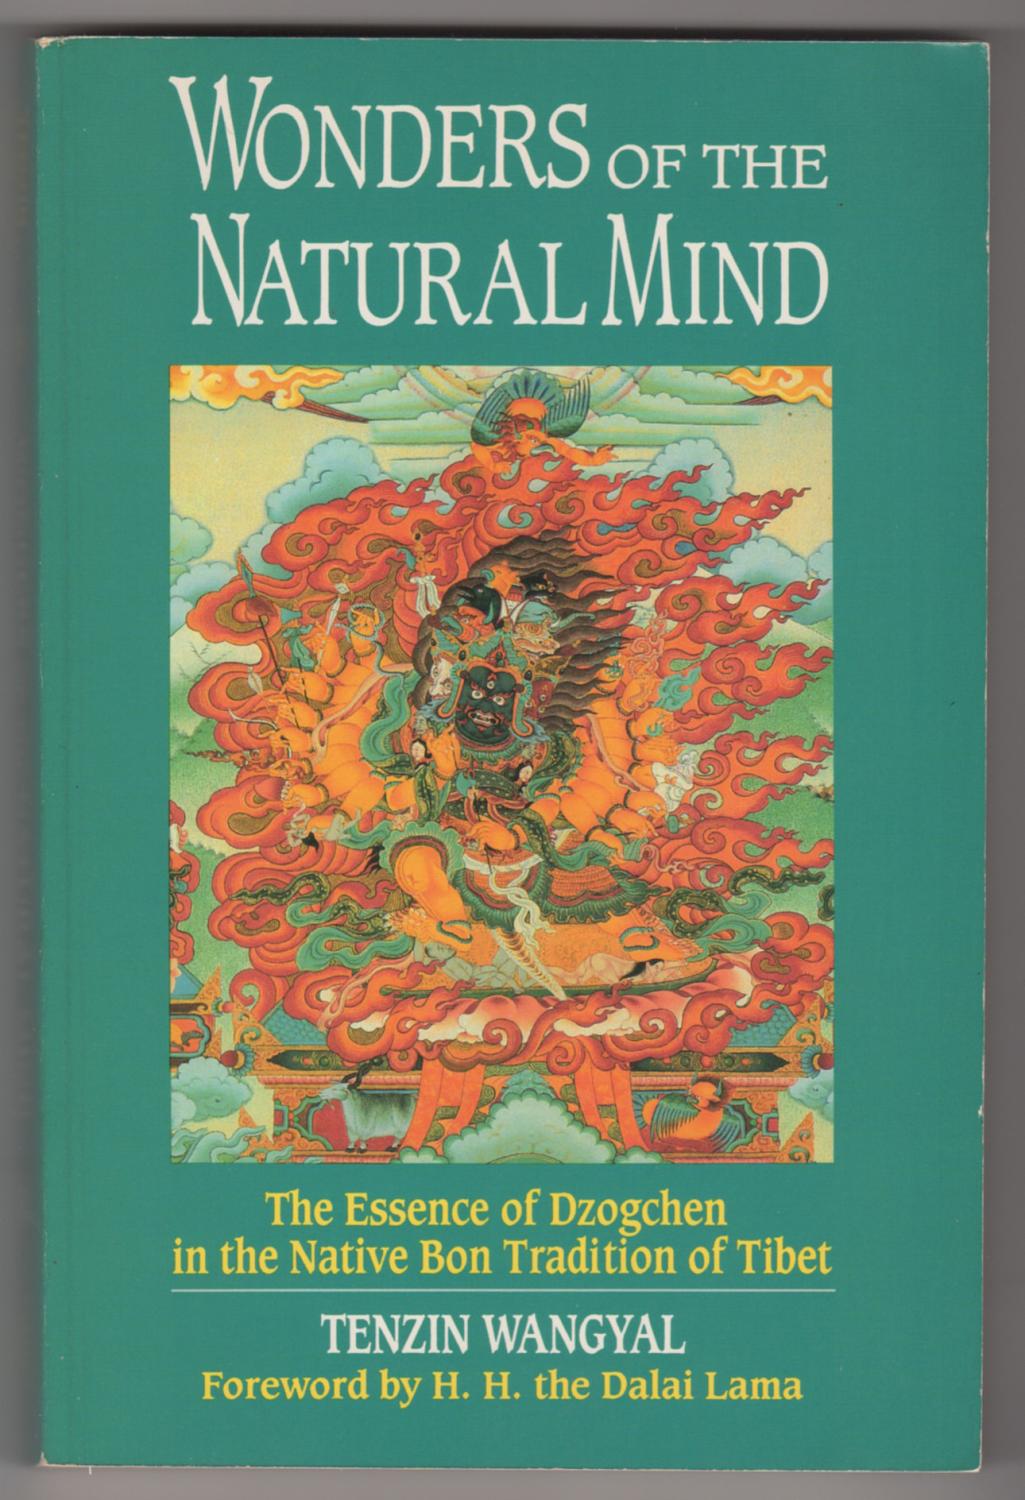 Wonders of the Natural Mind : The Essence of Dzogchen in the Native Bon Tradition of Tibet - Wangyal, Tenzin, Rinpoche (foreword by His Holiness the Dalai Lama; photographs by Charles Stein)